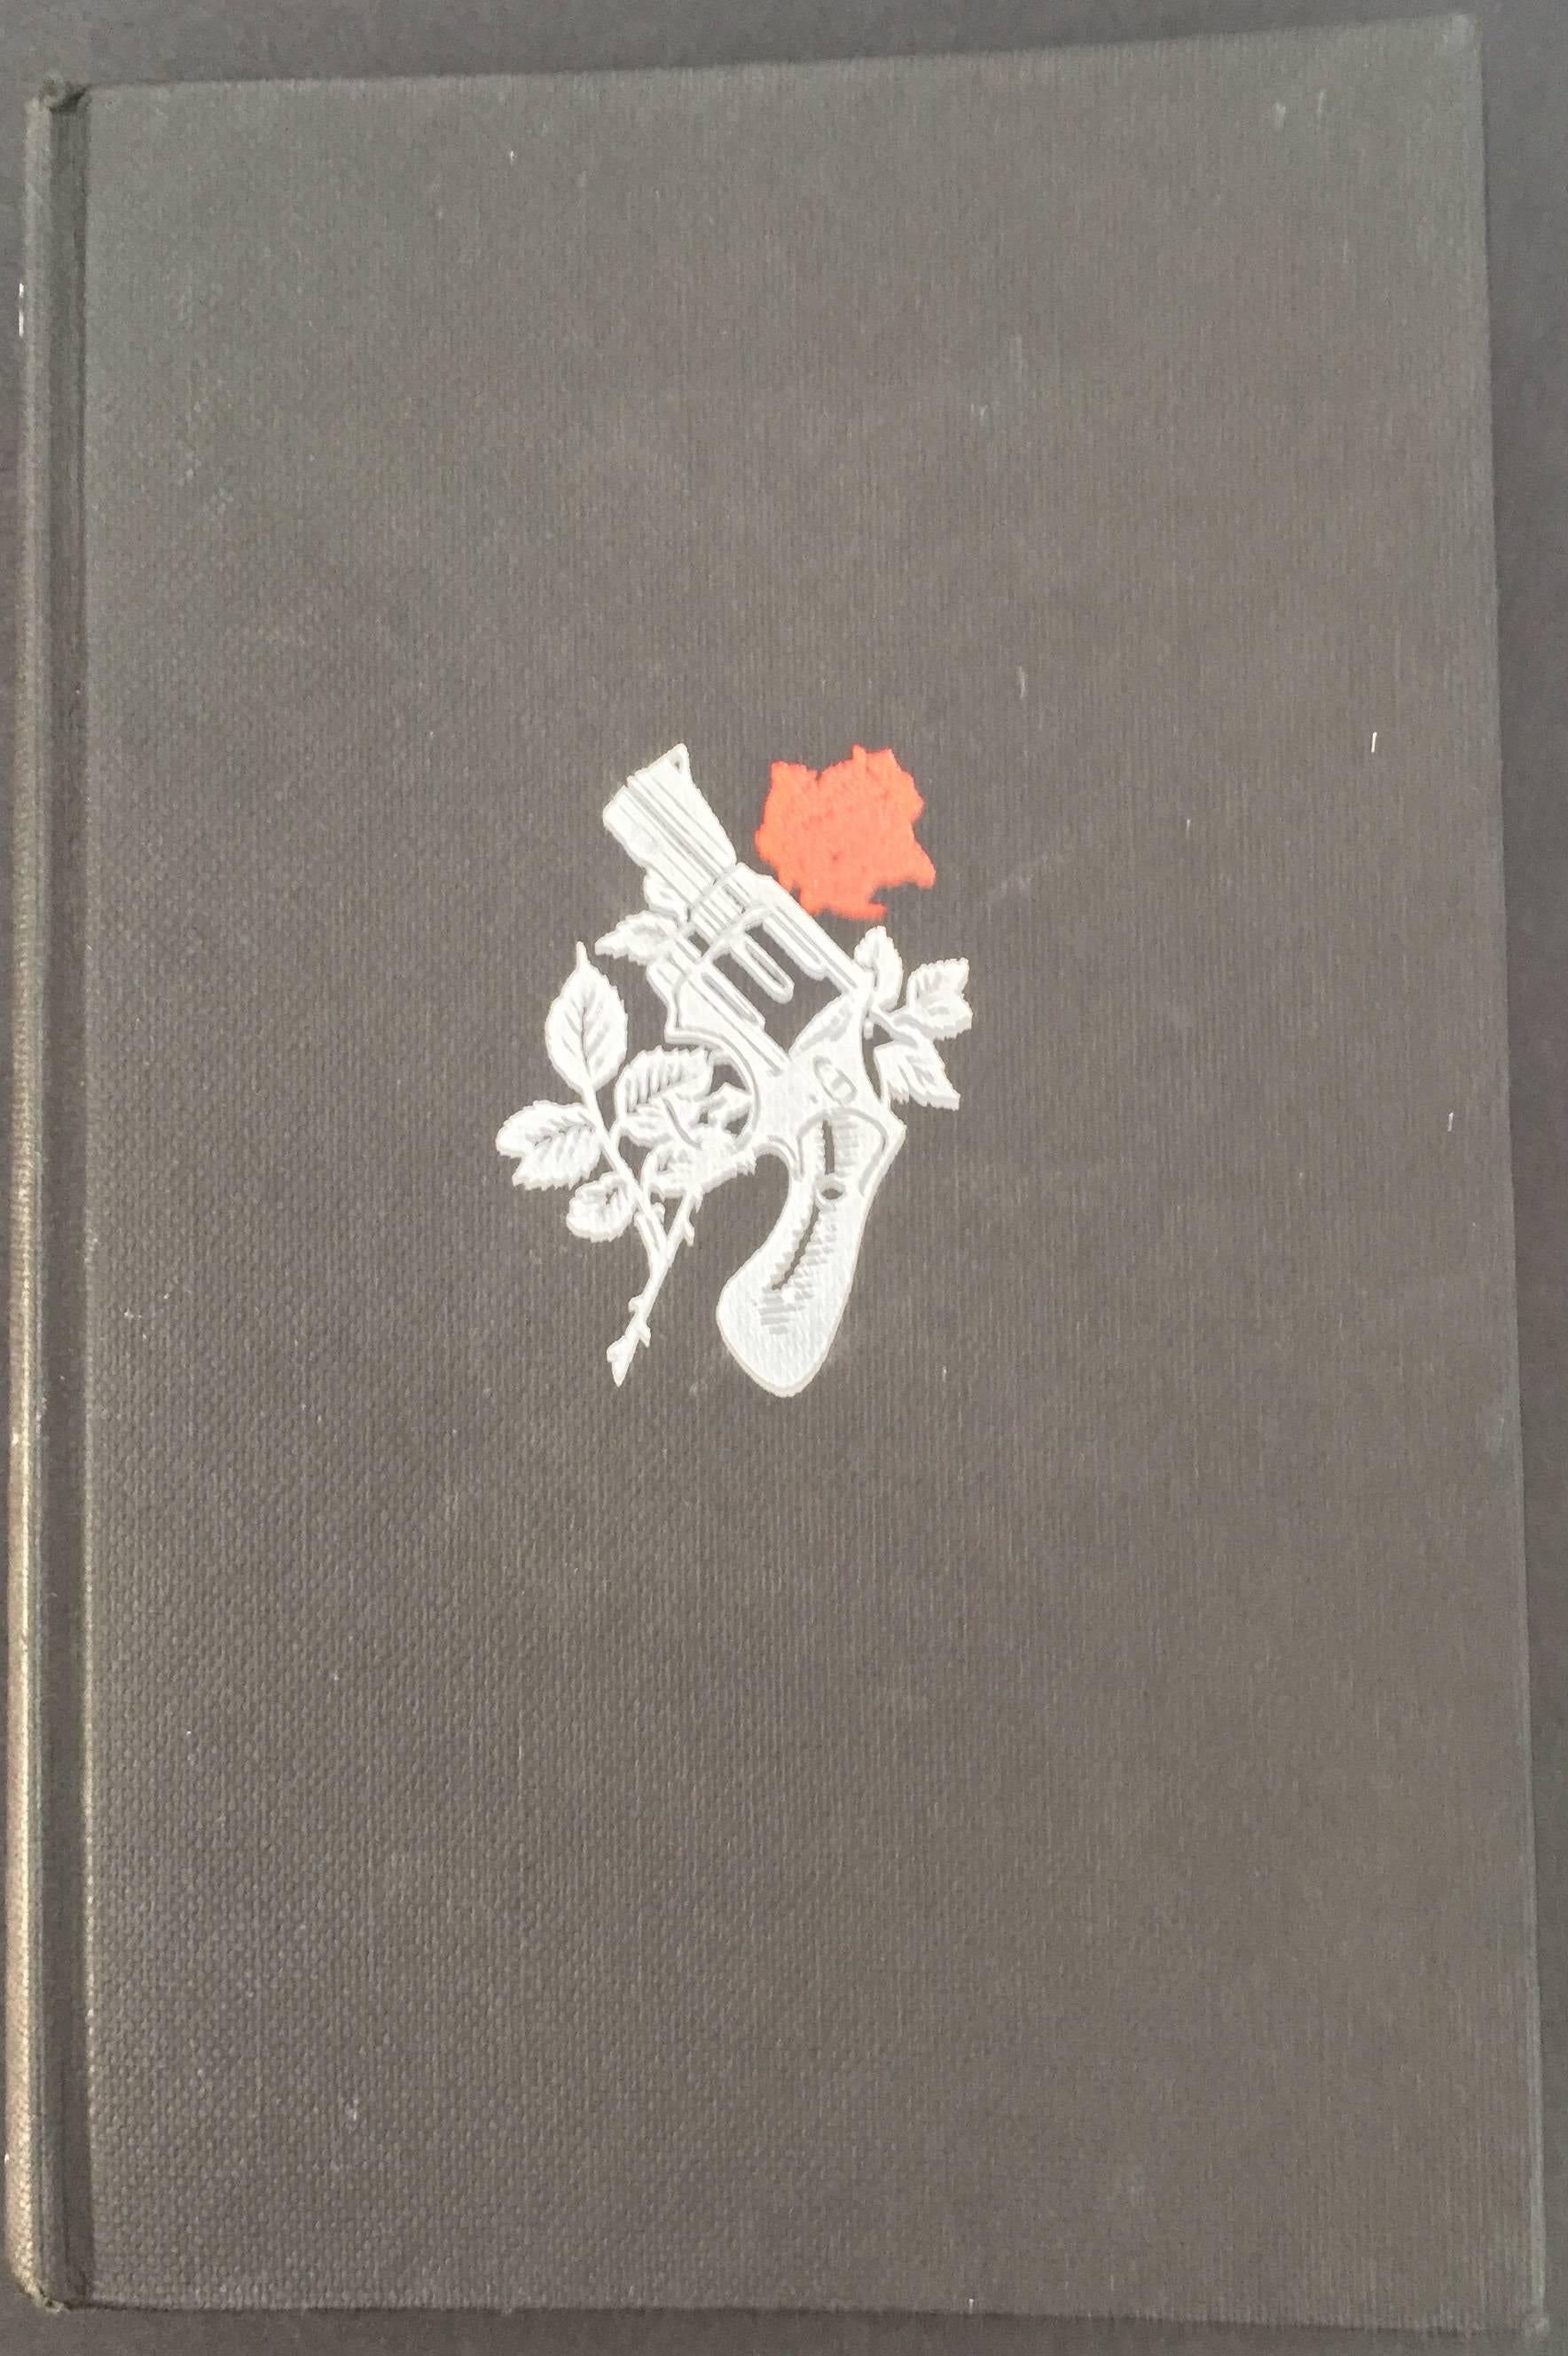 Published by Johnathan Cape, London, first edition.

Scarce first edition of one of the most successful Bond novels, in which Bond must recover a stolen Soviet encryption device from SMERSH.

Fleming considered this, his fifth Bond novel, in